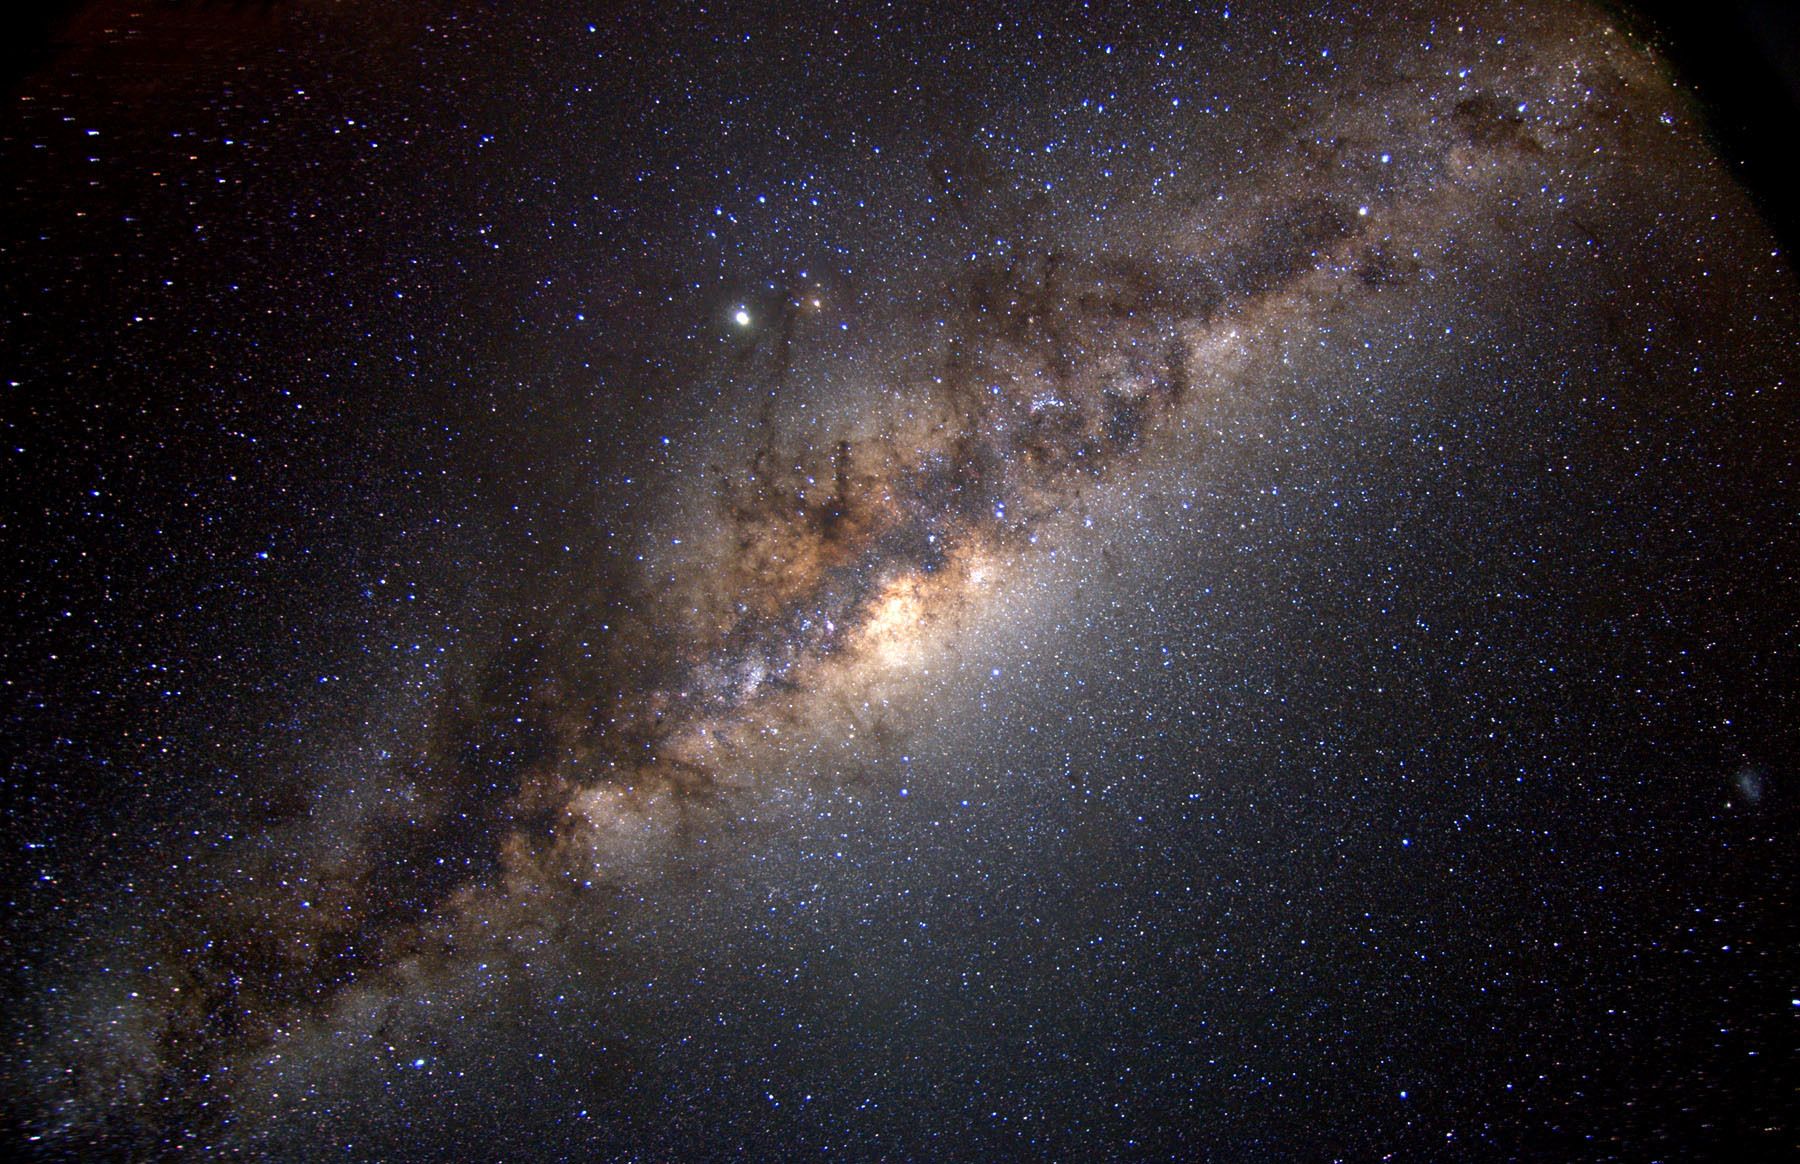 Milky Way Facts | Why Is the Milky Way Warped